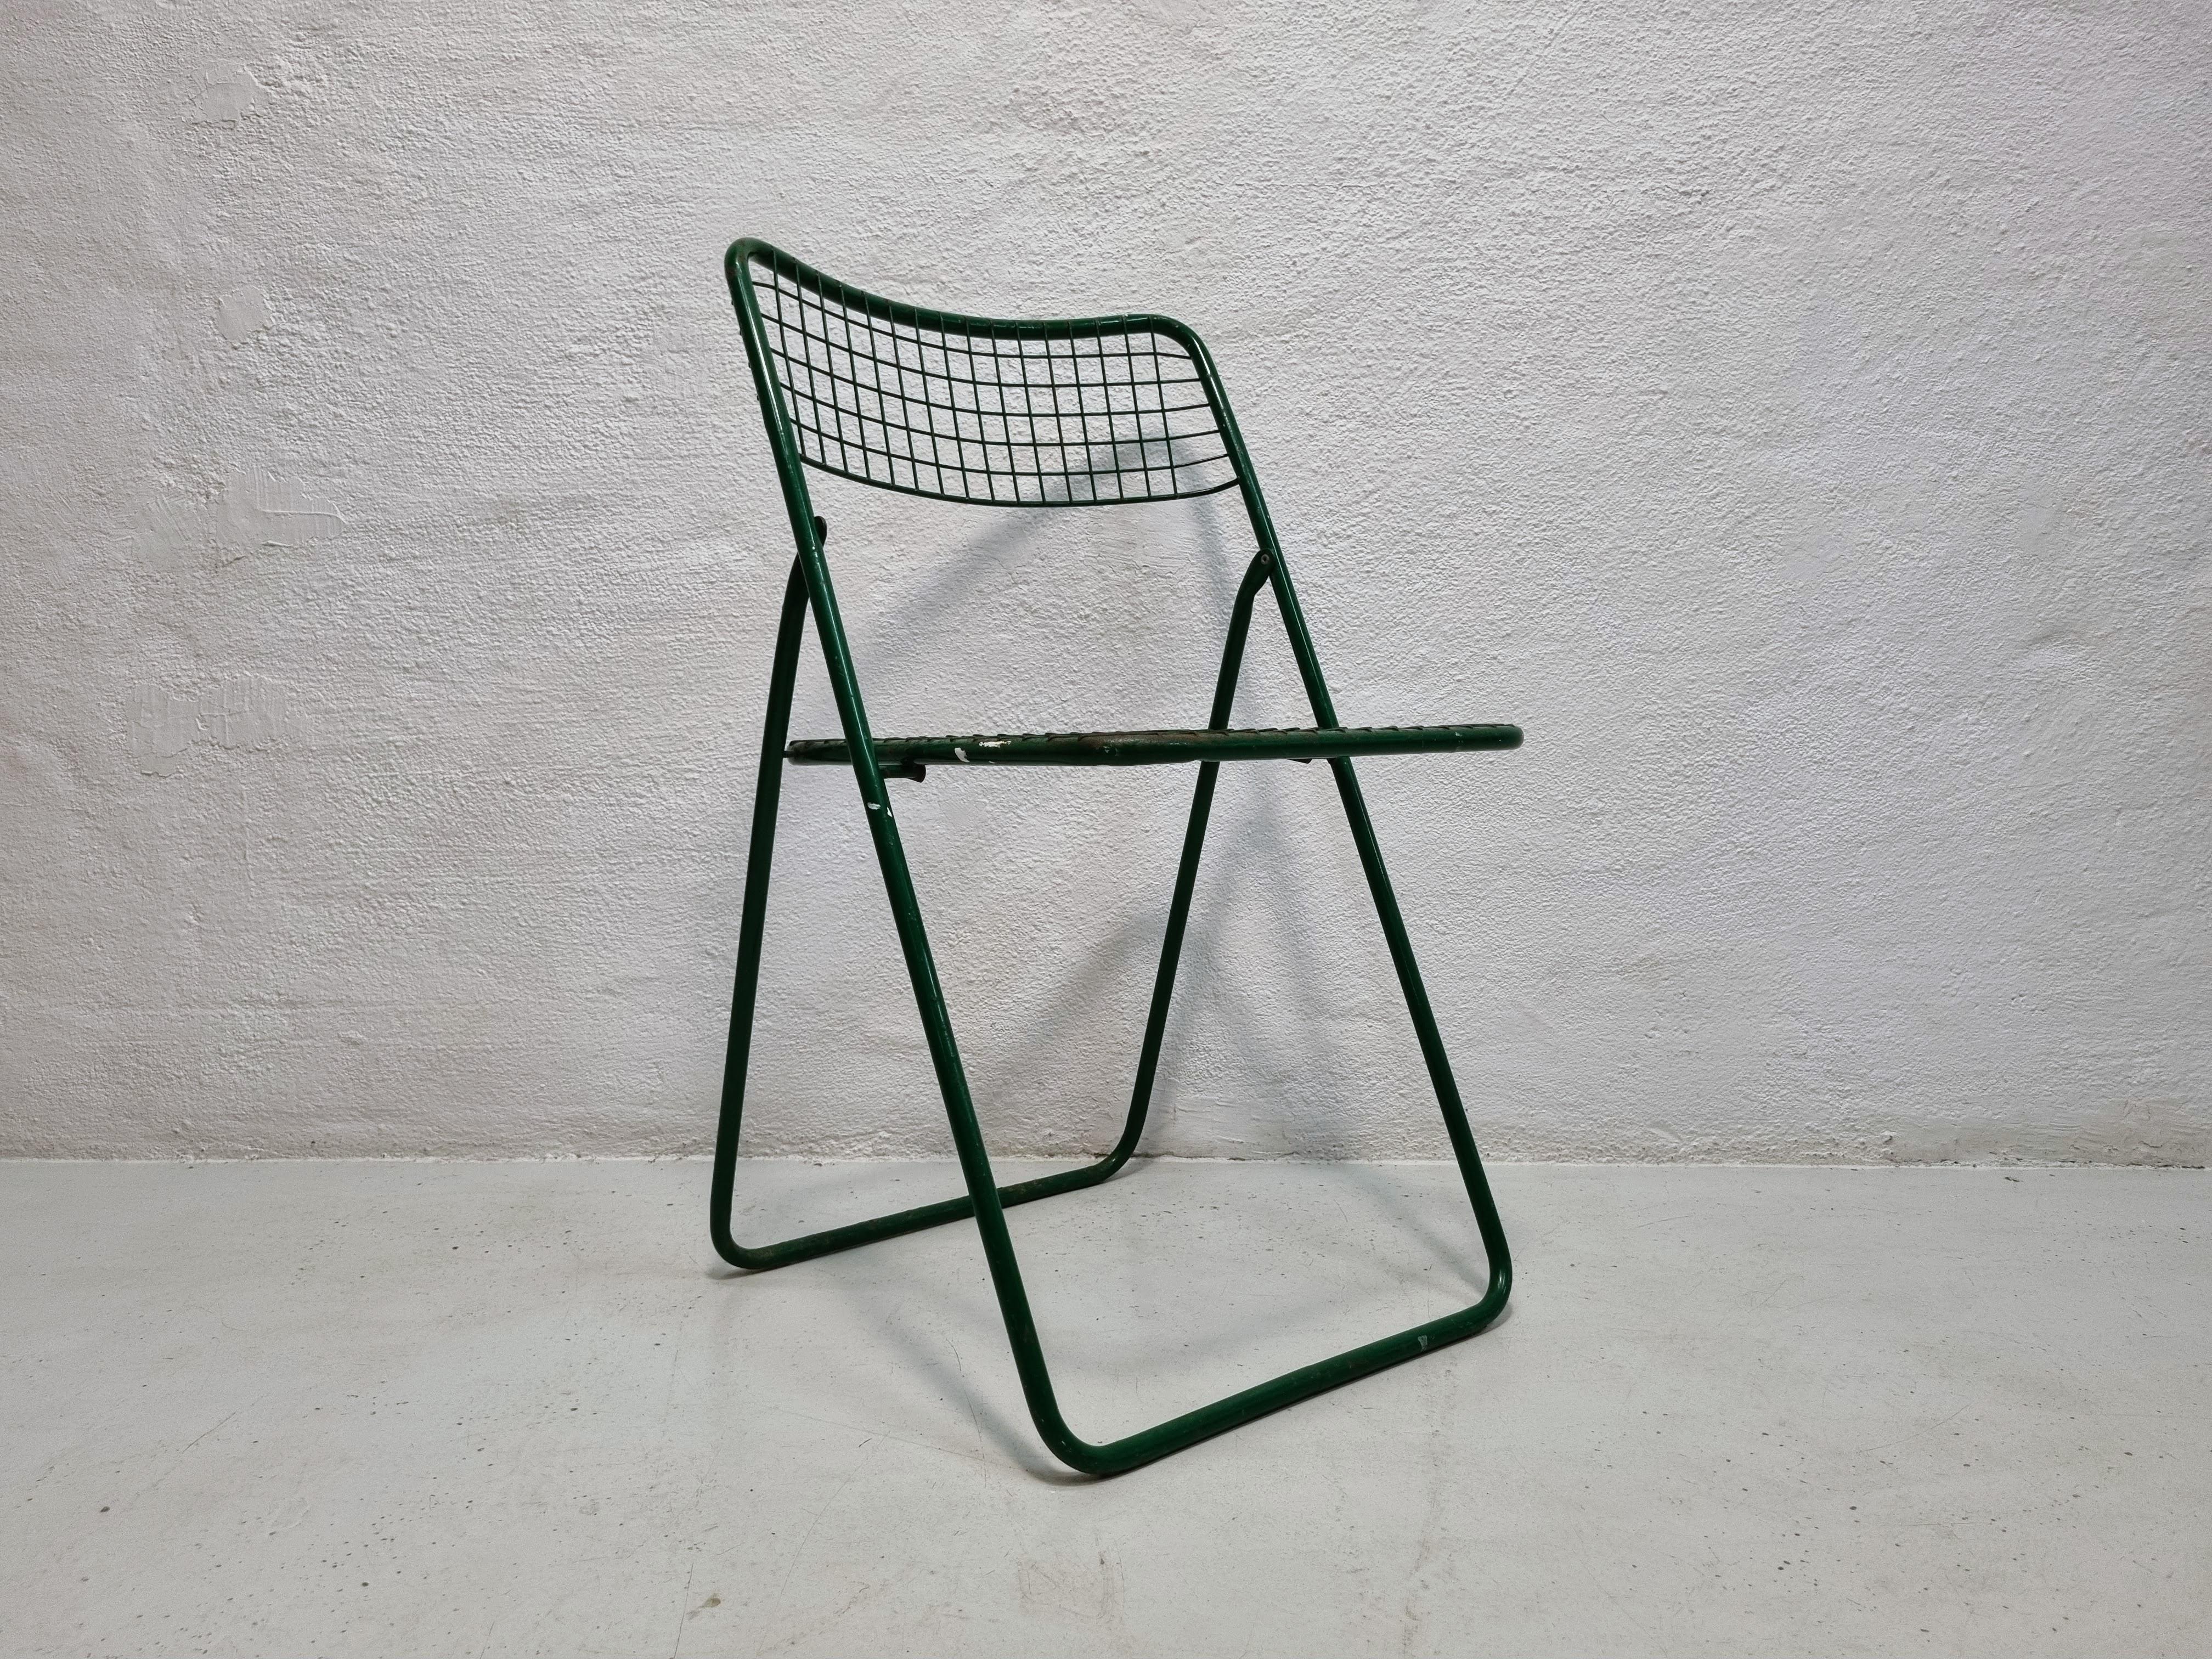 Green metal folding chair. 
This chair was designed by Niels Gammelgaard for Ikea in the 1970s. 
This chair appears with the original green paint in patinated condition, which gives it a slightly rough look.